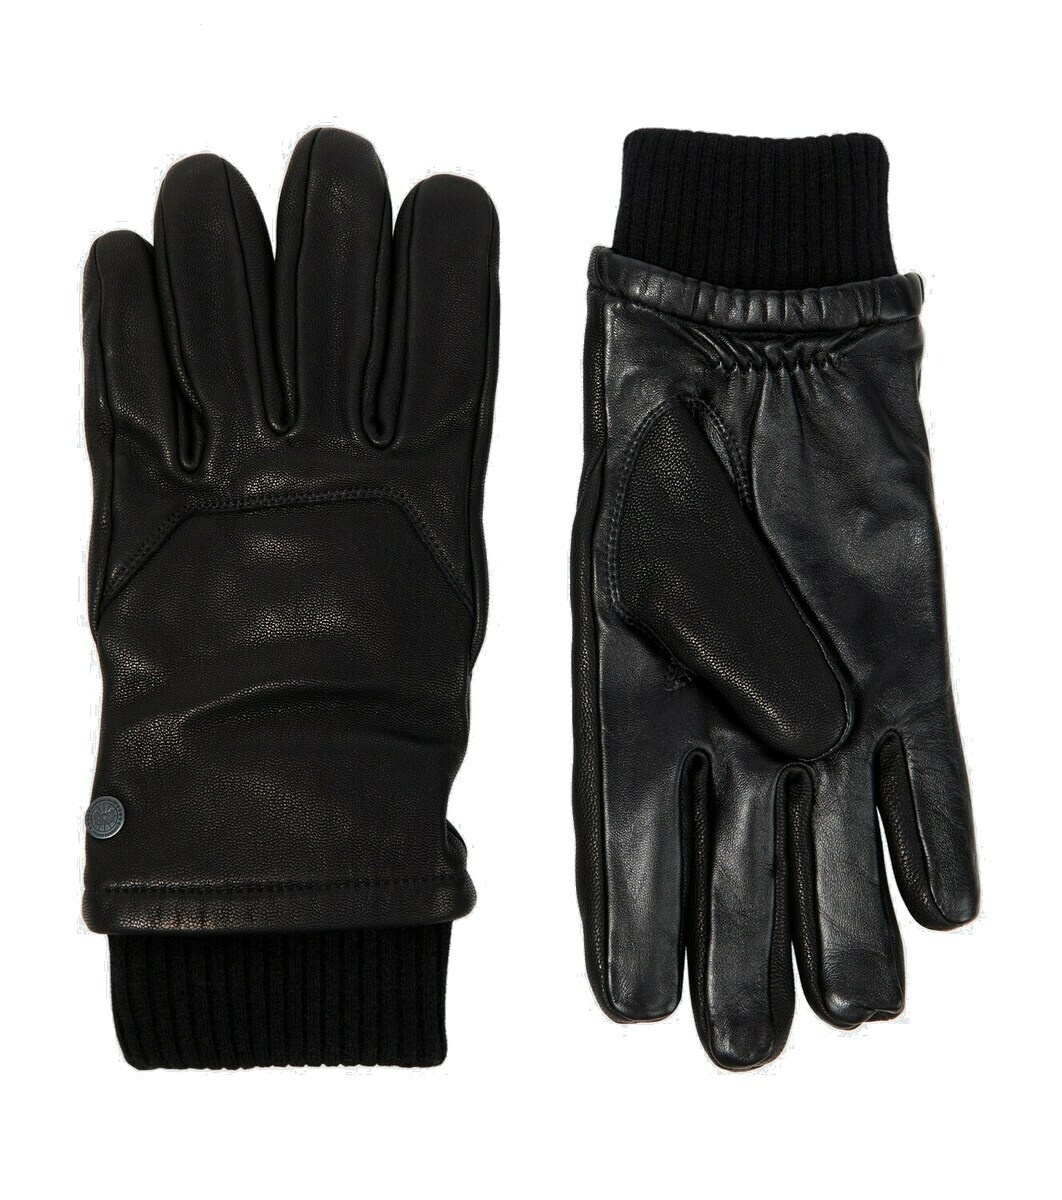 Photo: Canada Goose Workman leather gloves